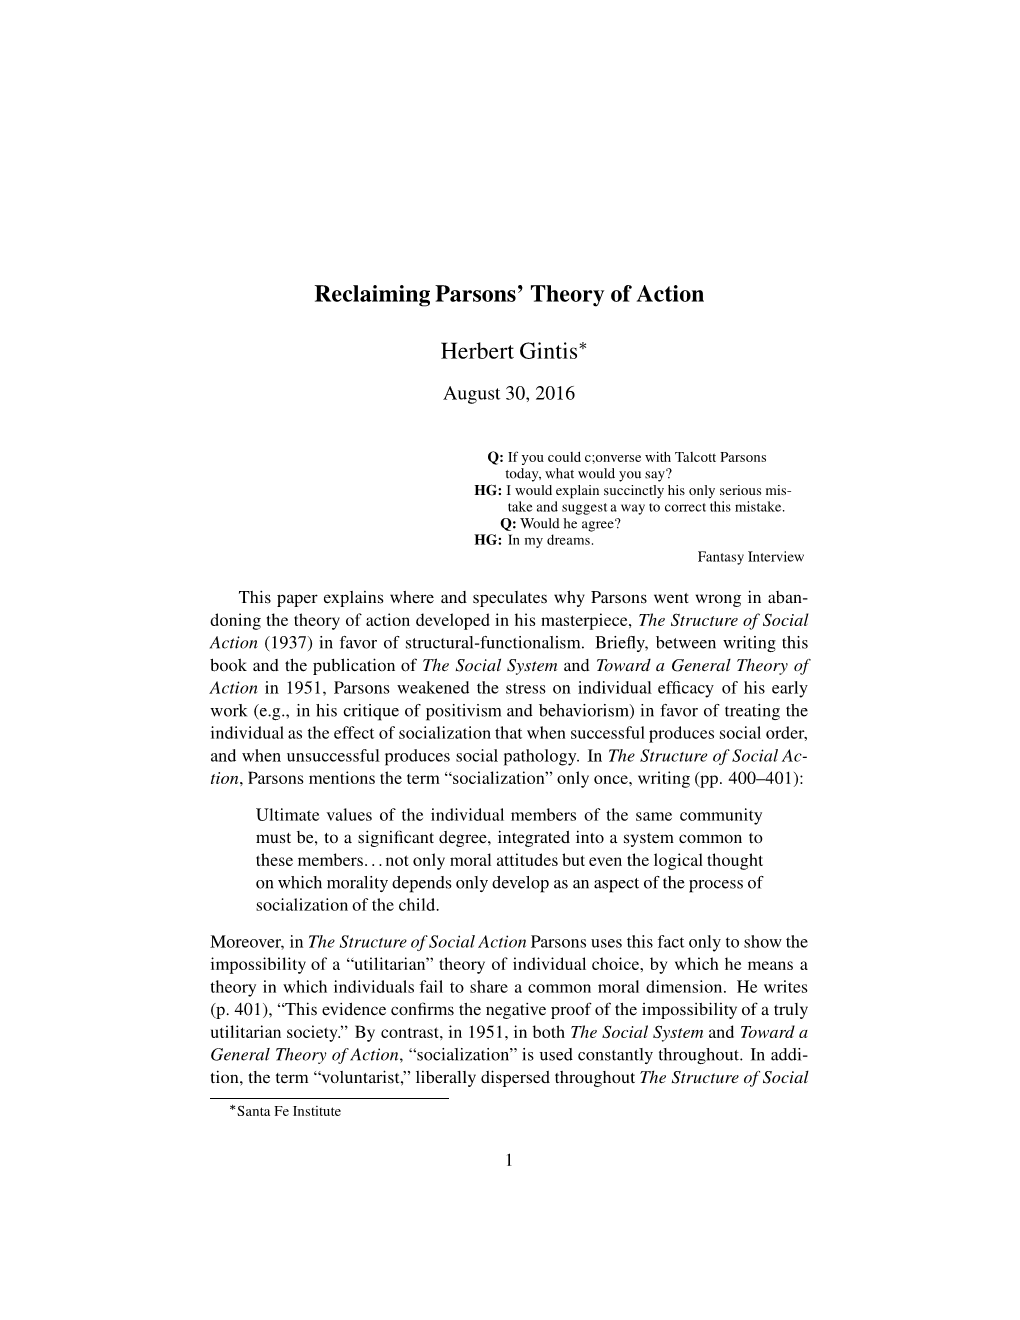 Reclaiming Parsons' Theory of Action Herbert Gintis